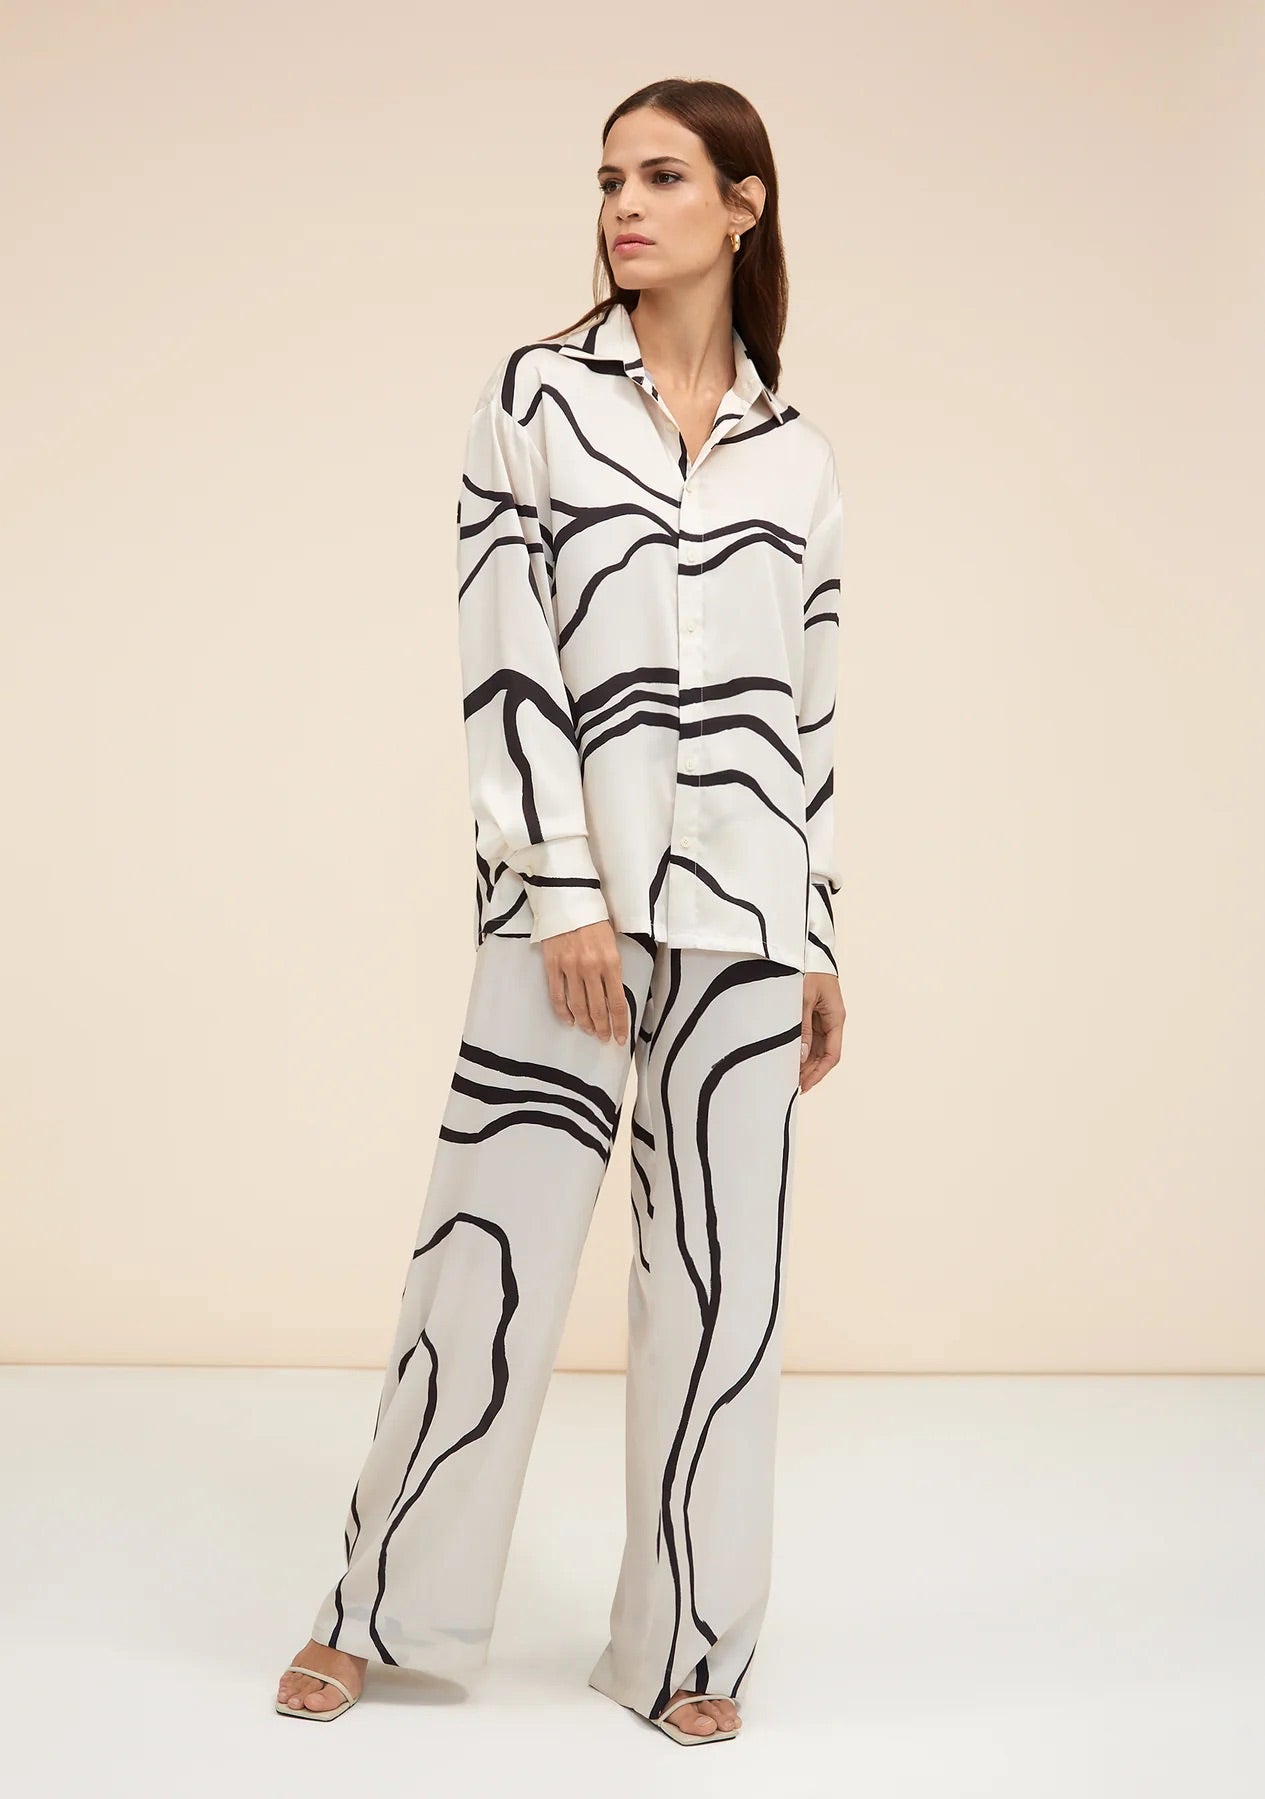 Black abstract pattern co-ord set with wide leg pants and button up shirt fashionable womenswear 